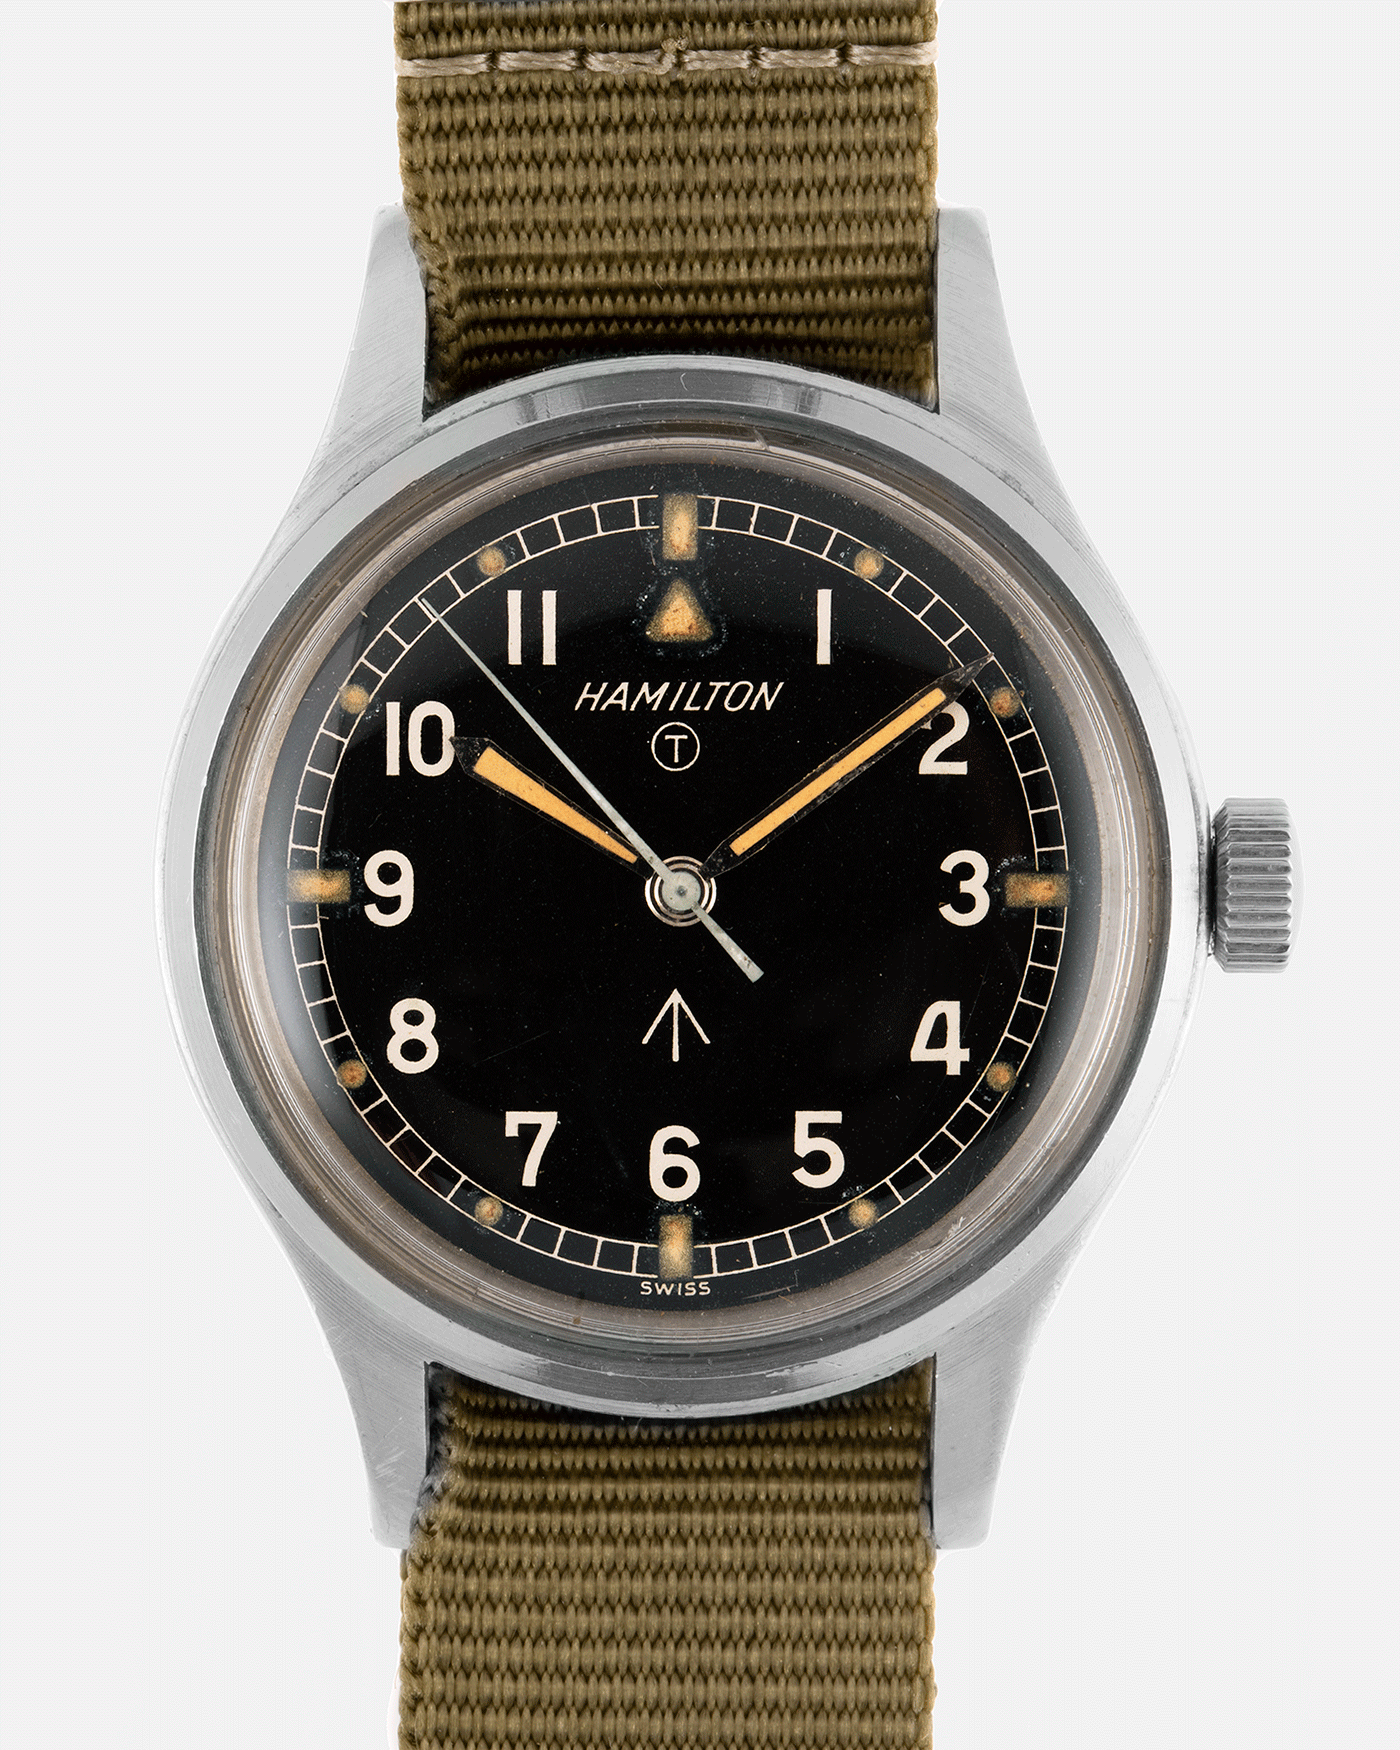 Brand: Hamilton Year: Late 1960’s Model: 6B Reference Number: 6B/910-1000 Serial Number: 9027 Material: Stainless Steel Movement: Cal. 75  Case Diameter: 36mm Lug Width: 18mm Strap: Green Fabric NATO Strap